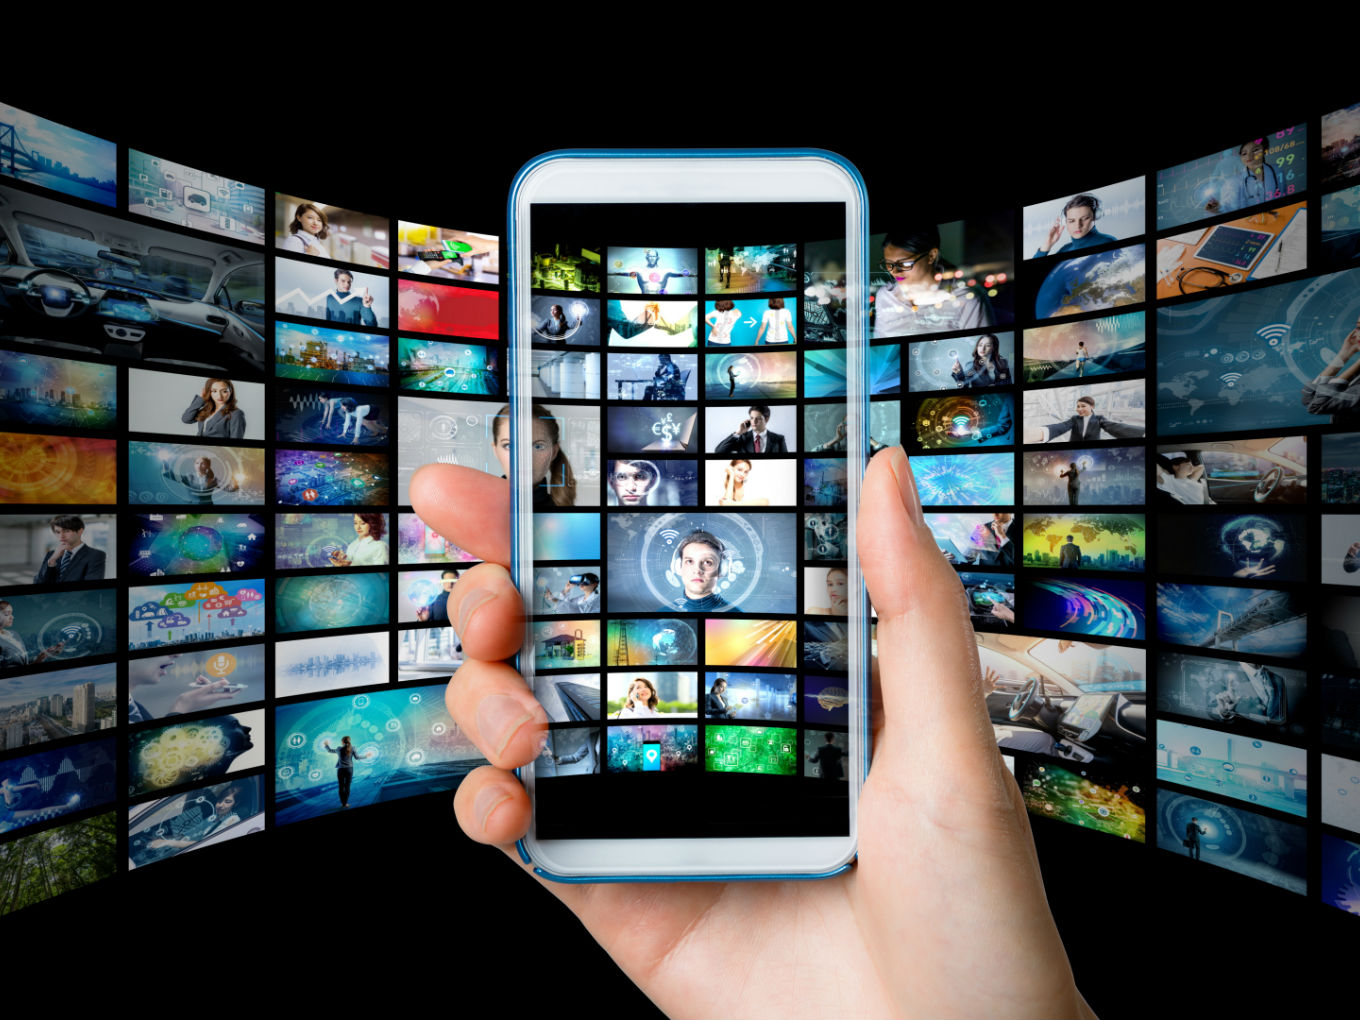 4 Out Of 5 Smartphone Users Use At Least One OTT Entertainment